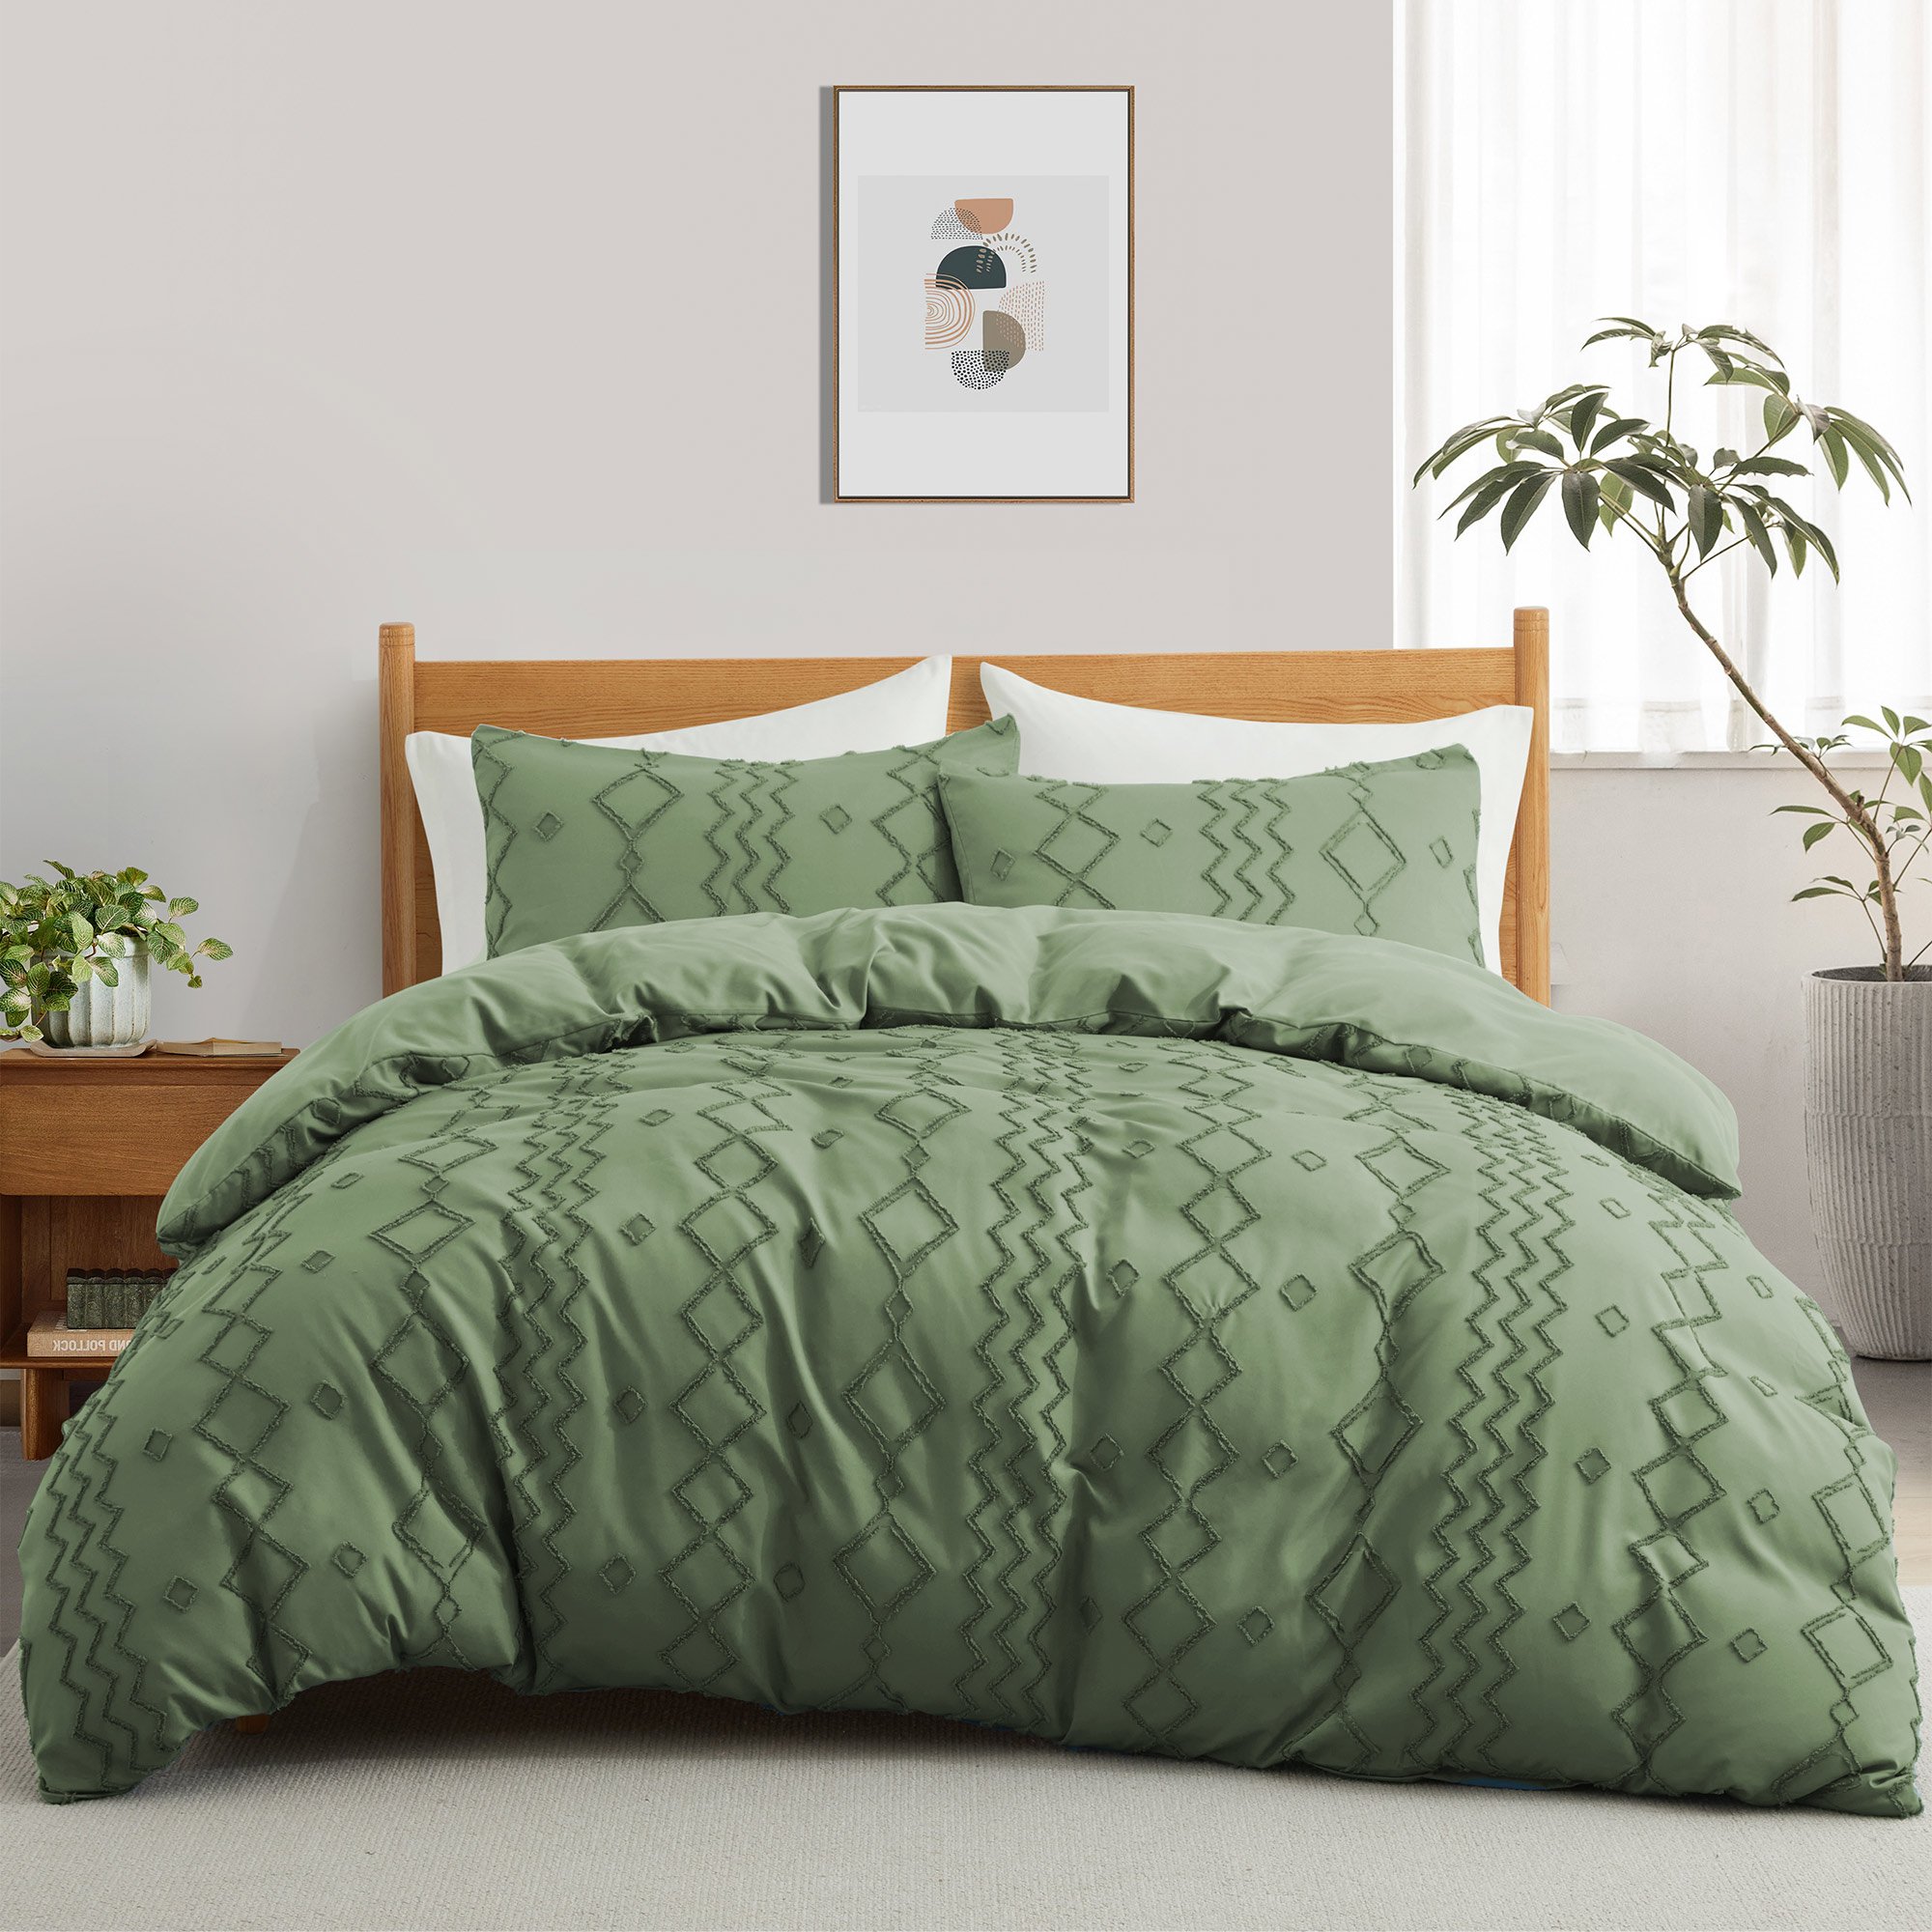 Basic Bedding Sets With All Season Goose Down Feather Comforter, 2 Pack Goose Down Pillows, Duvet Cover Set - Green Bundles Option, Full/Que